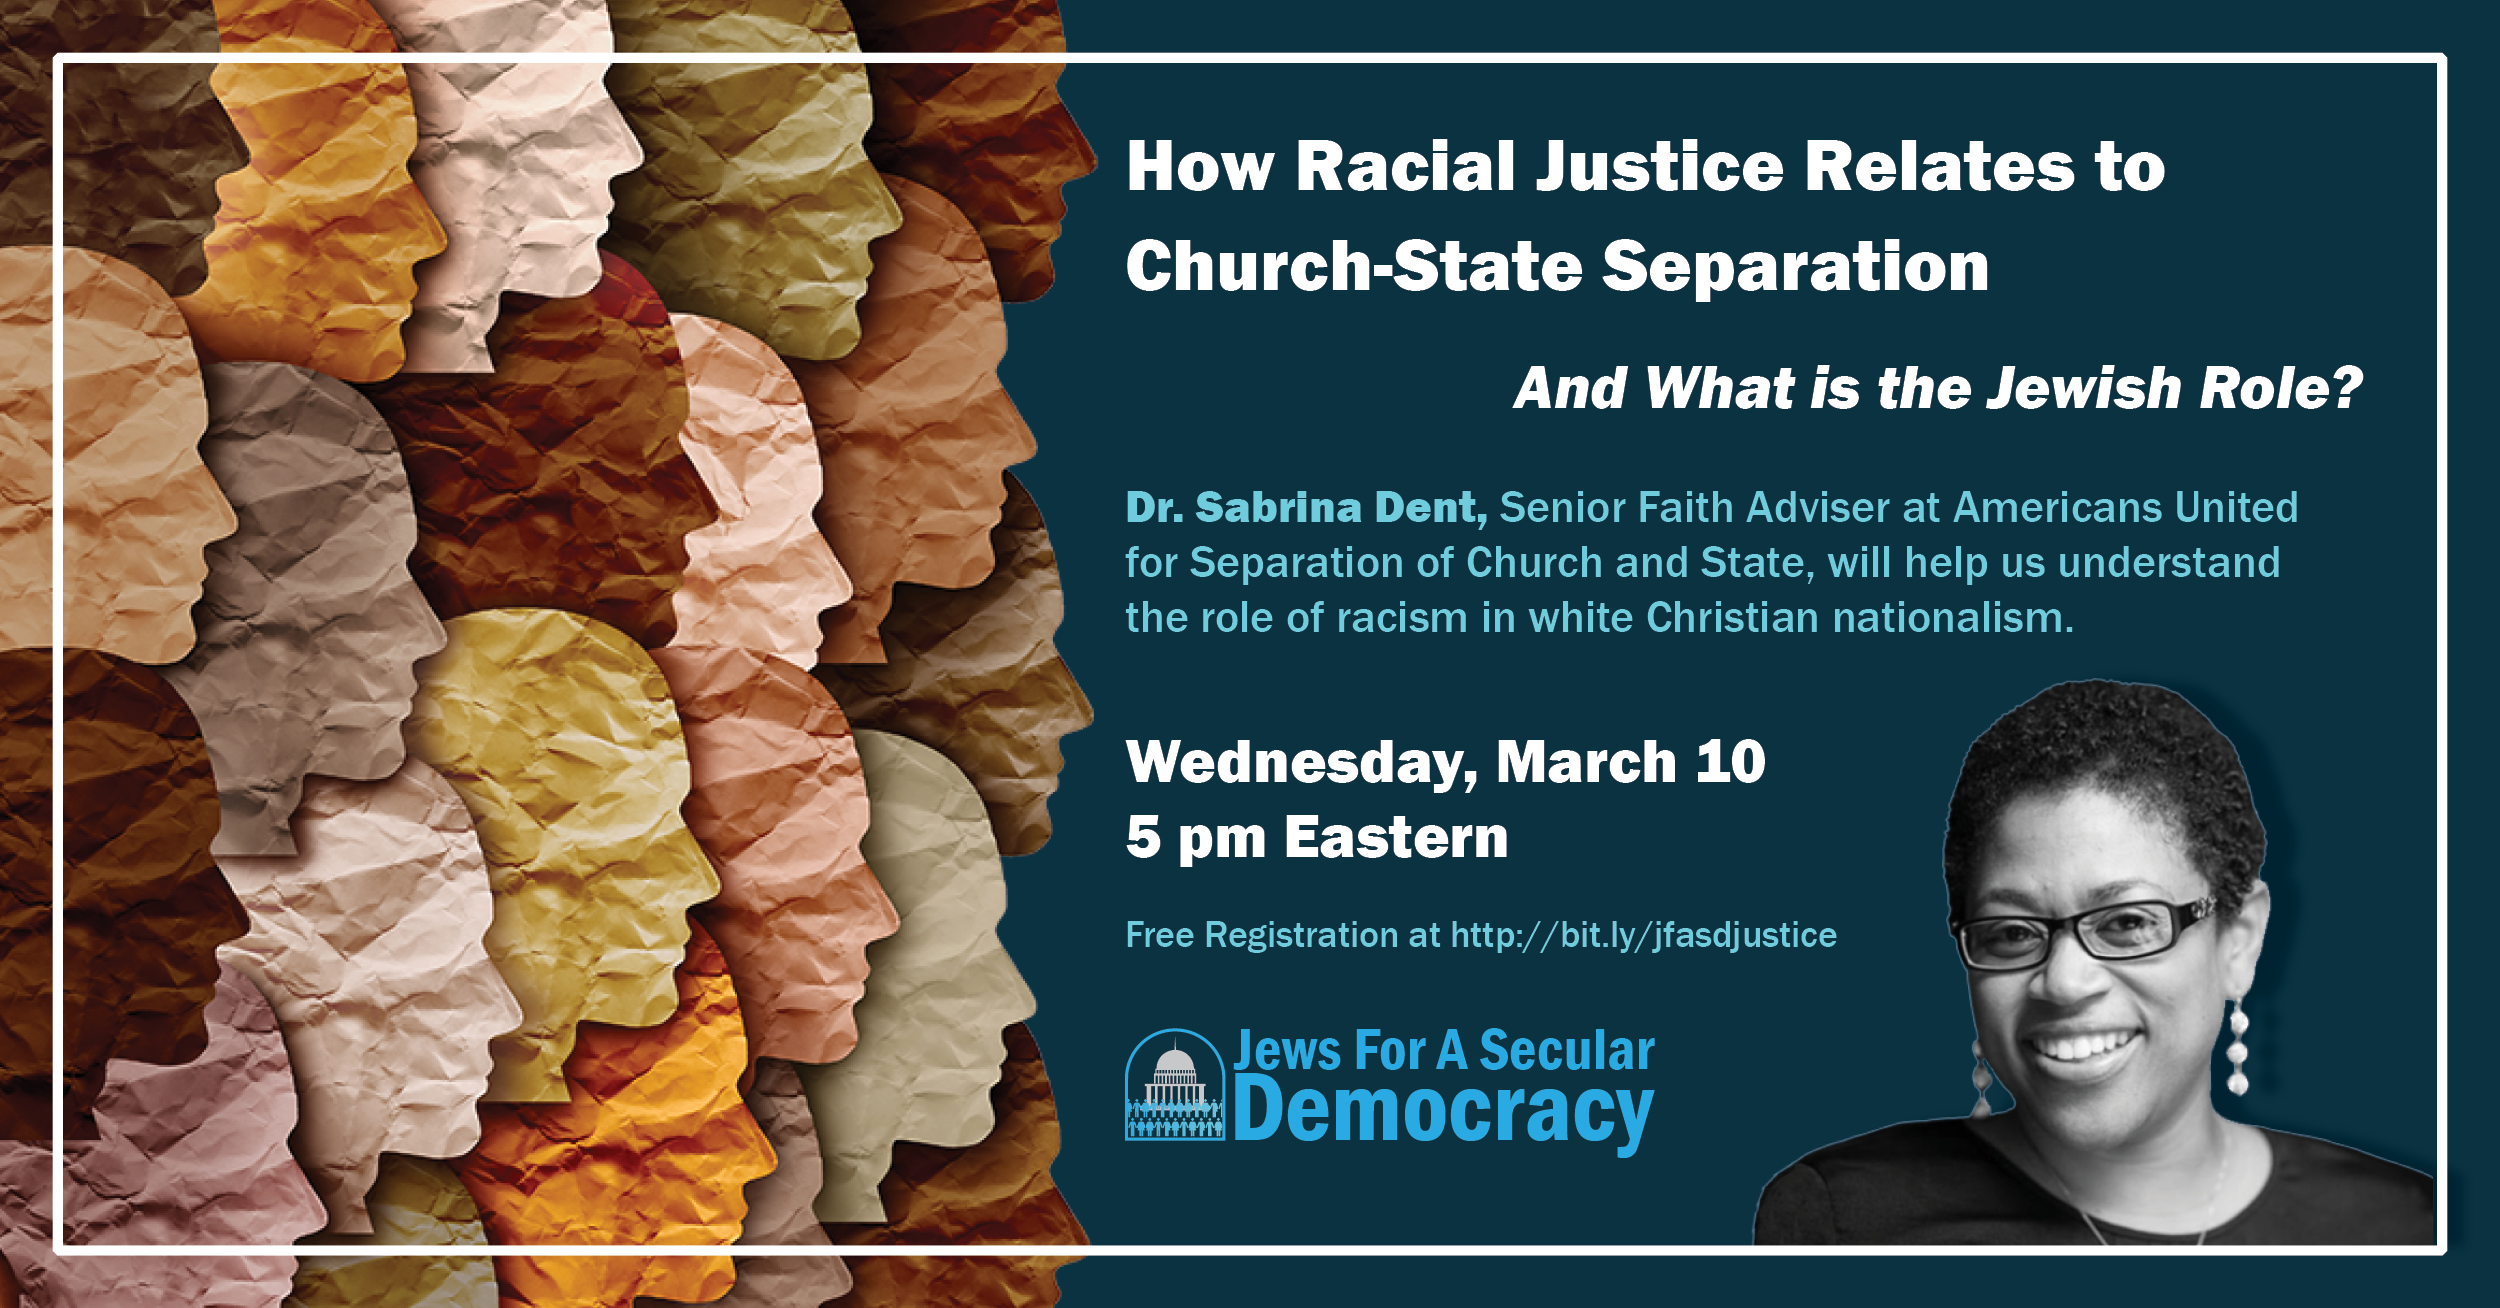 Racial Justice and Church-State Separation